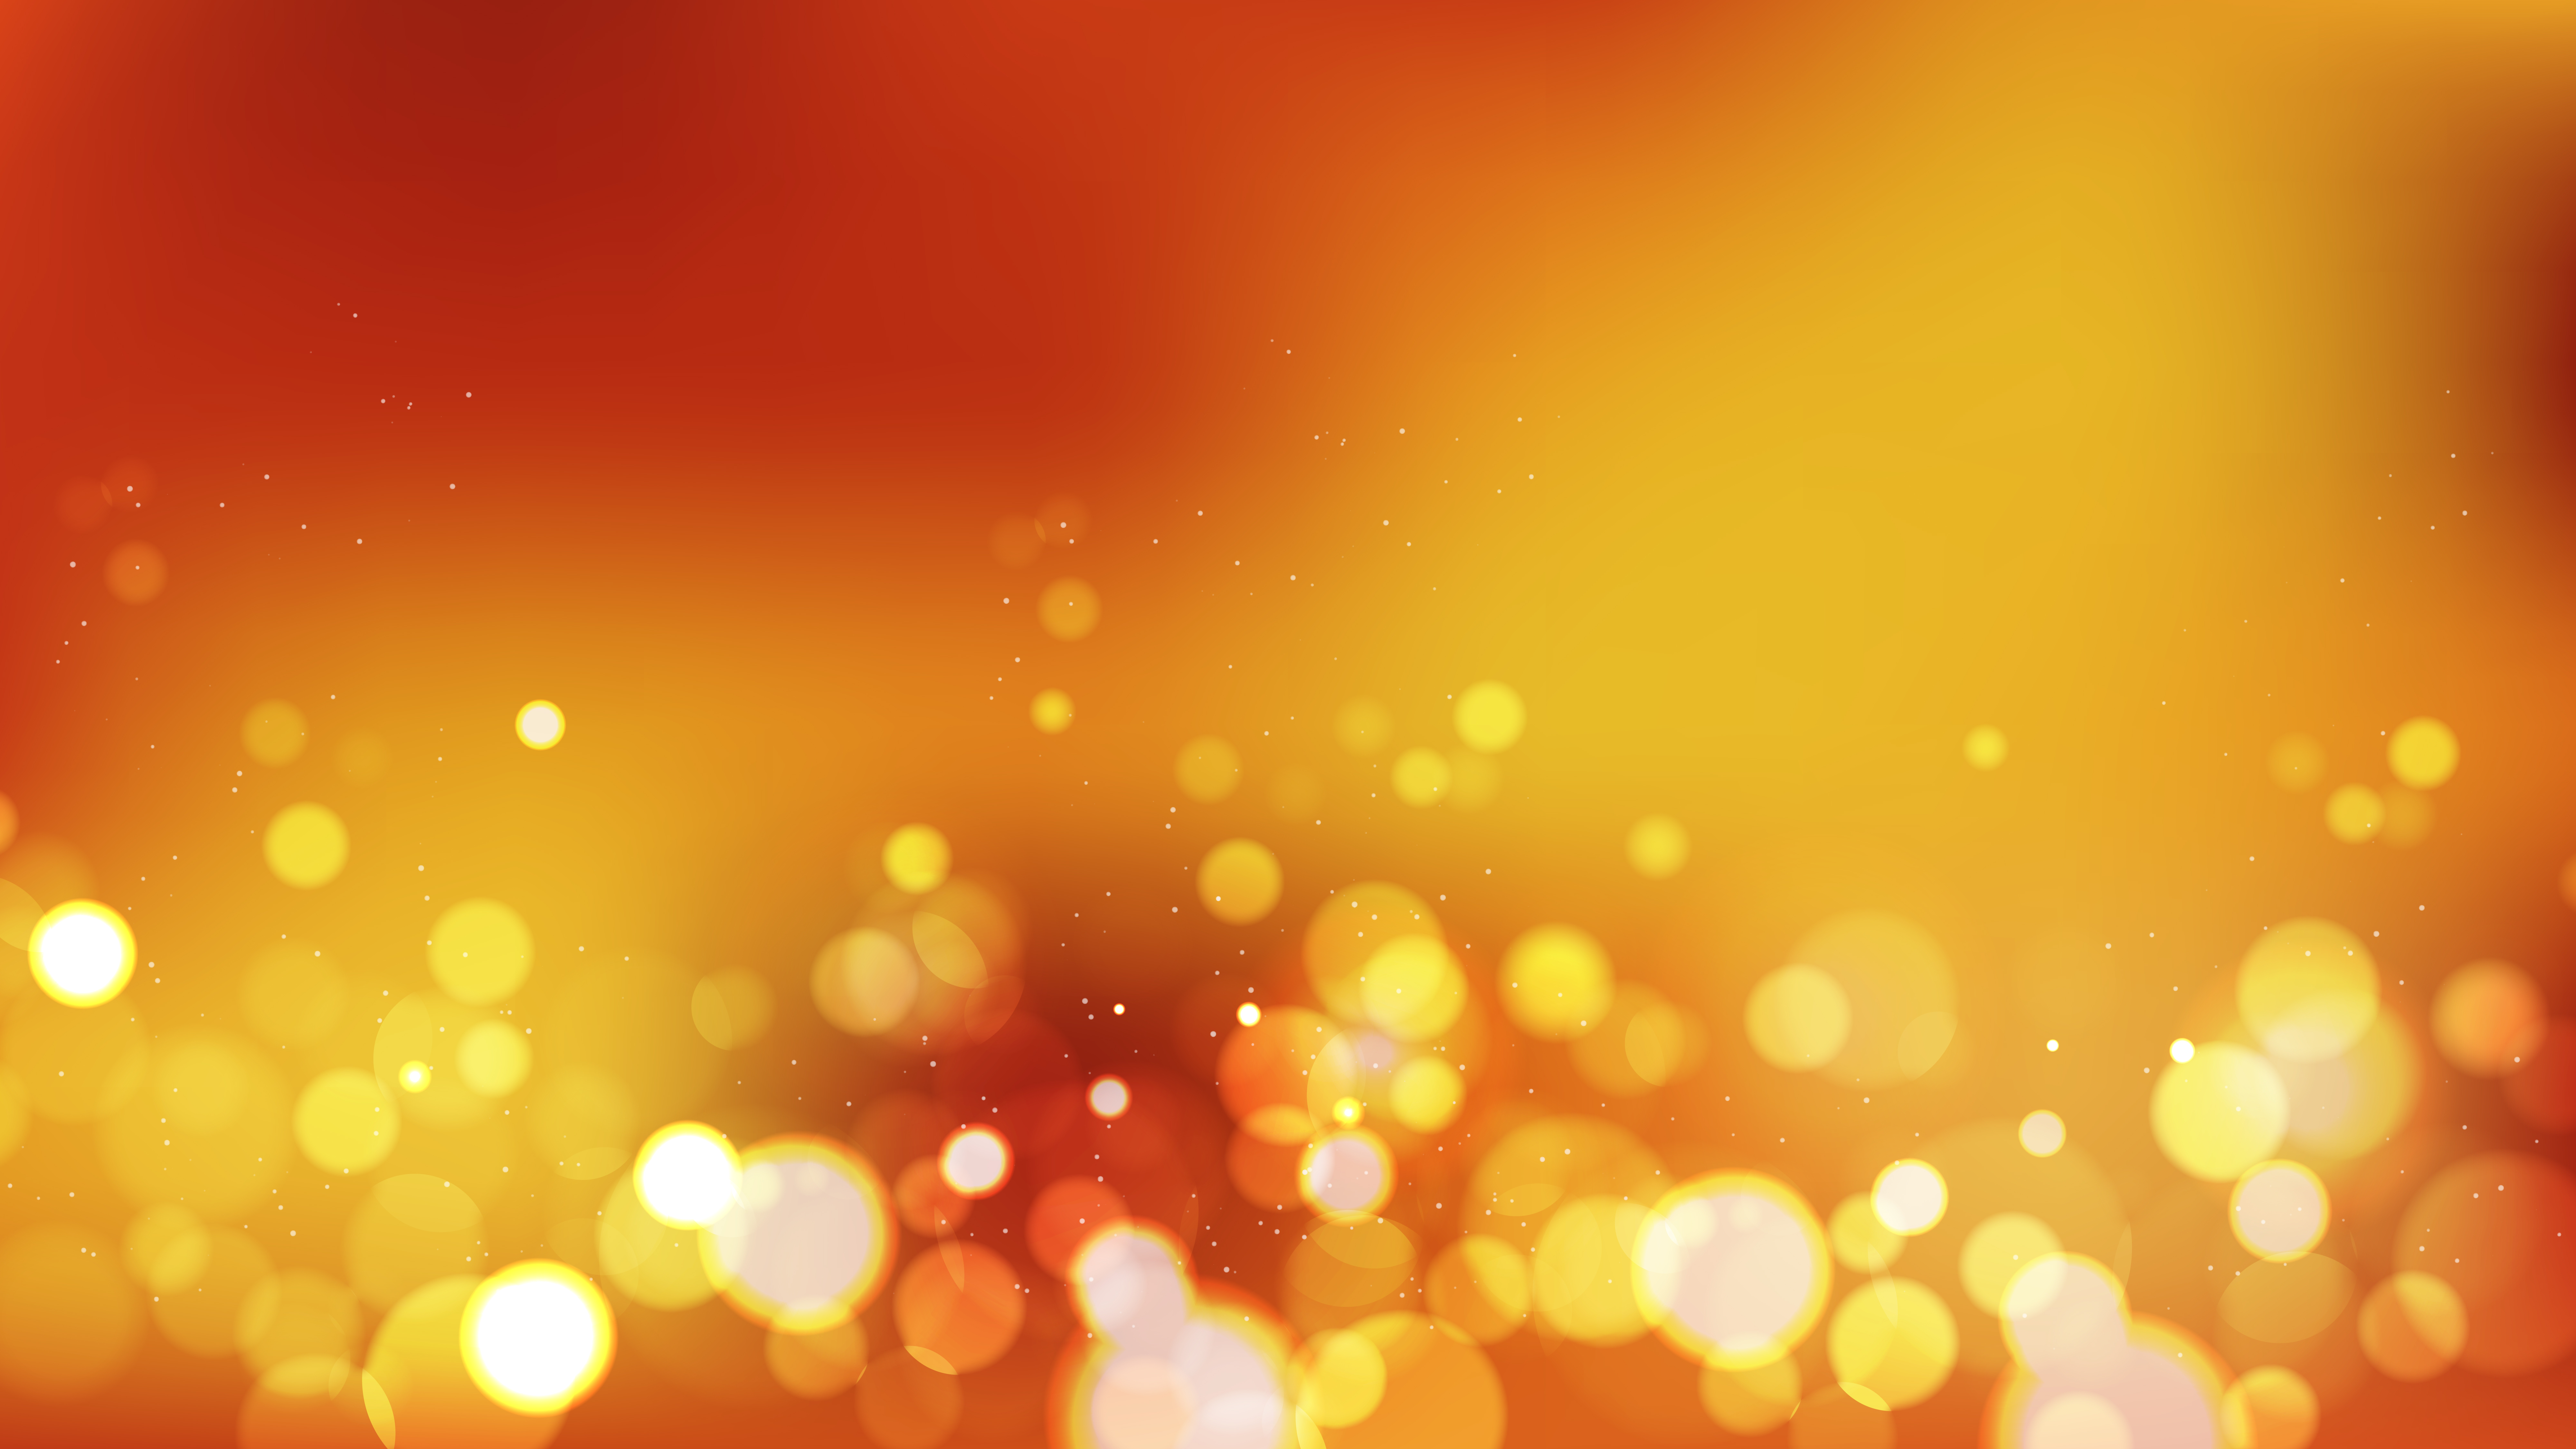 Free Red and Orange Blurry Lights Background